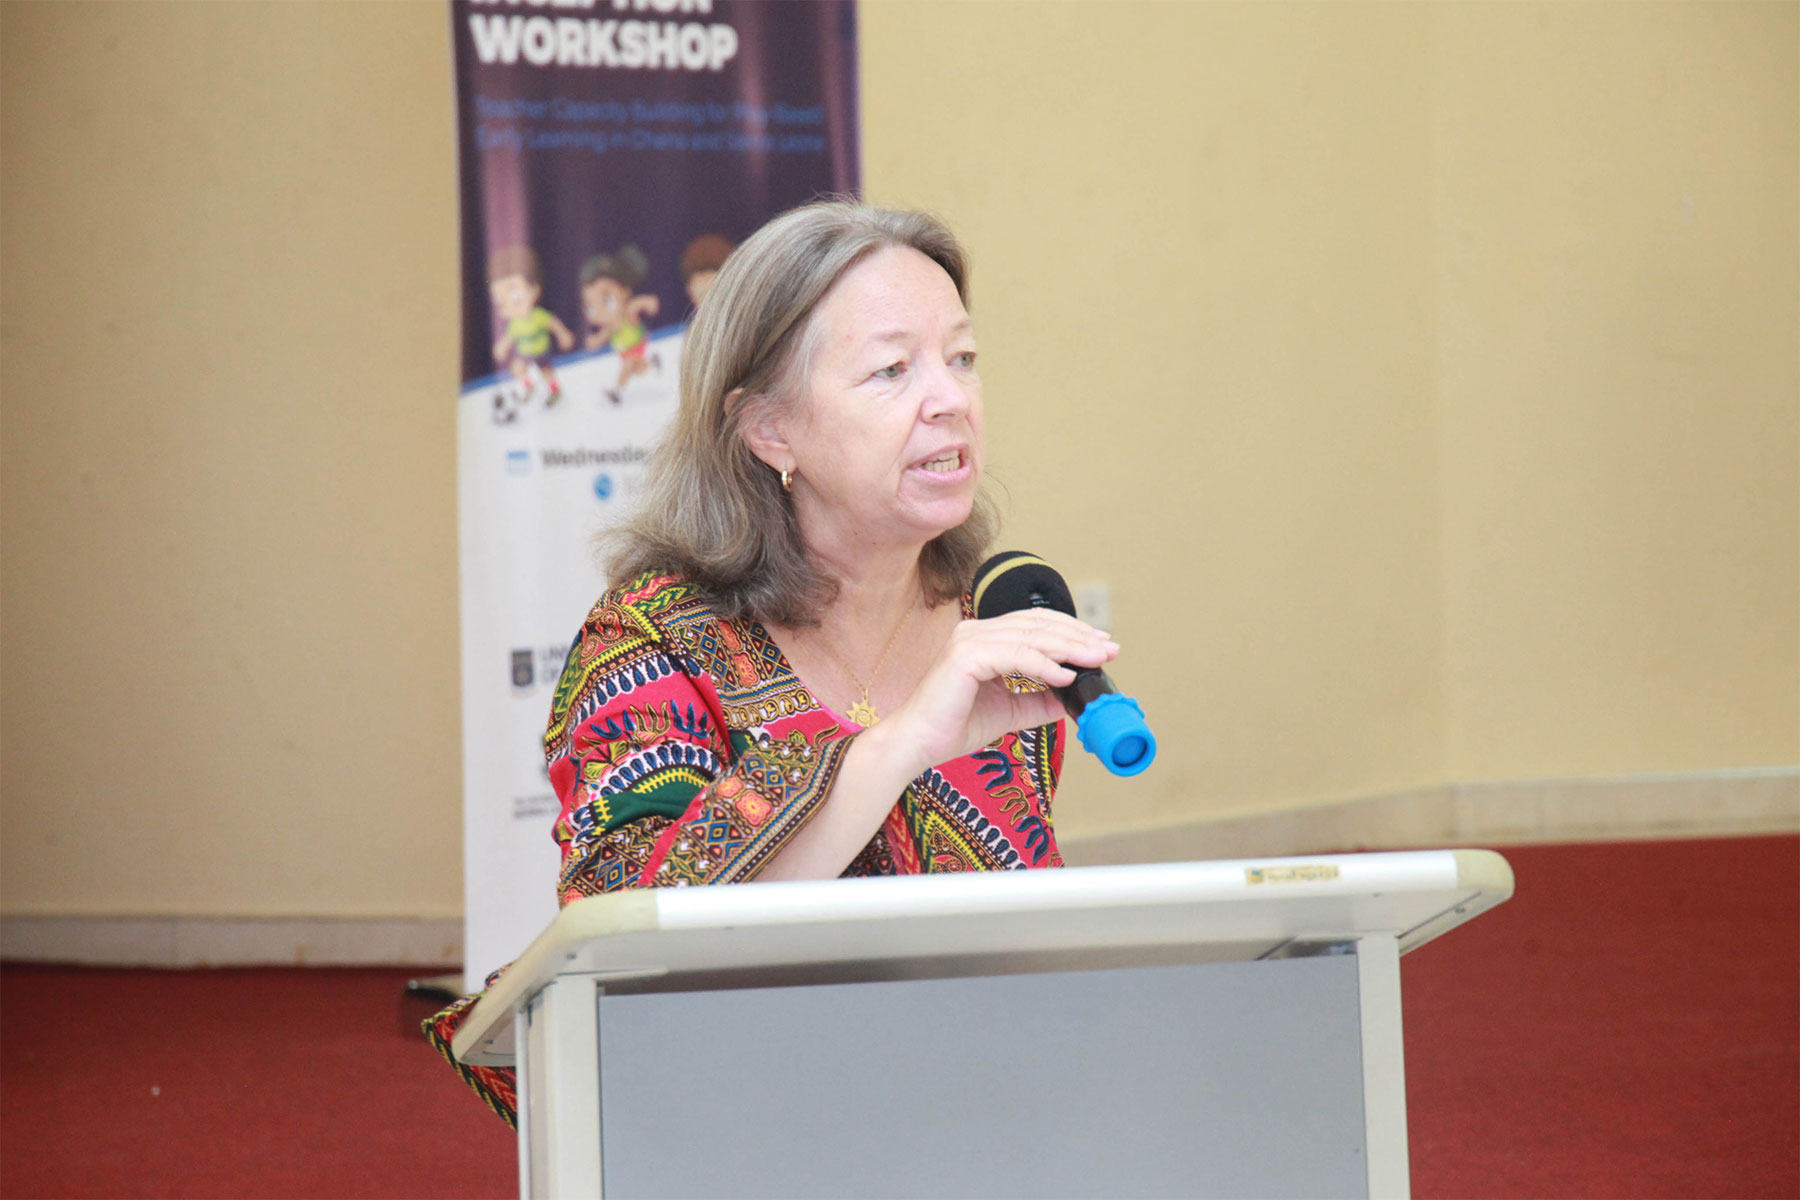 Dr. Casely-Hayford during her presentation of the project overview